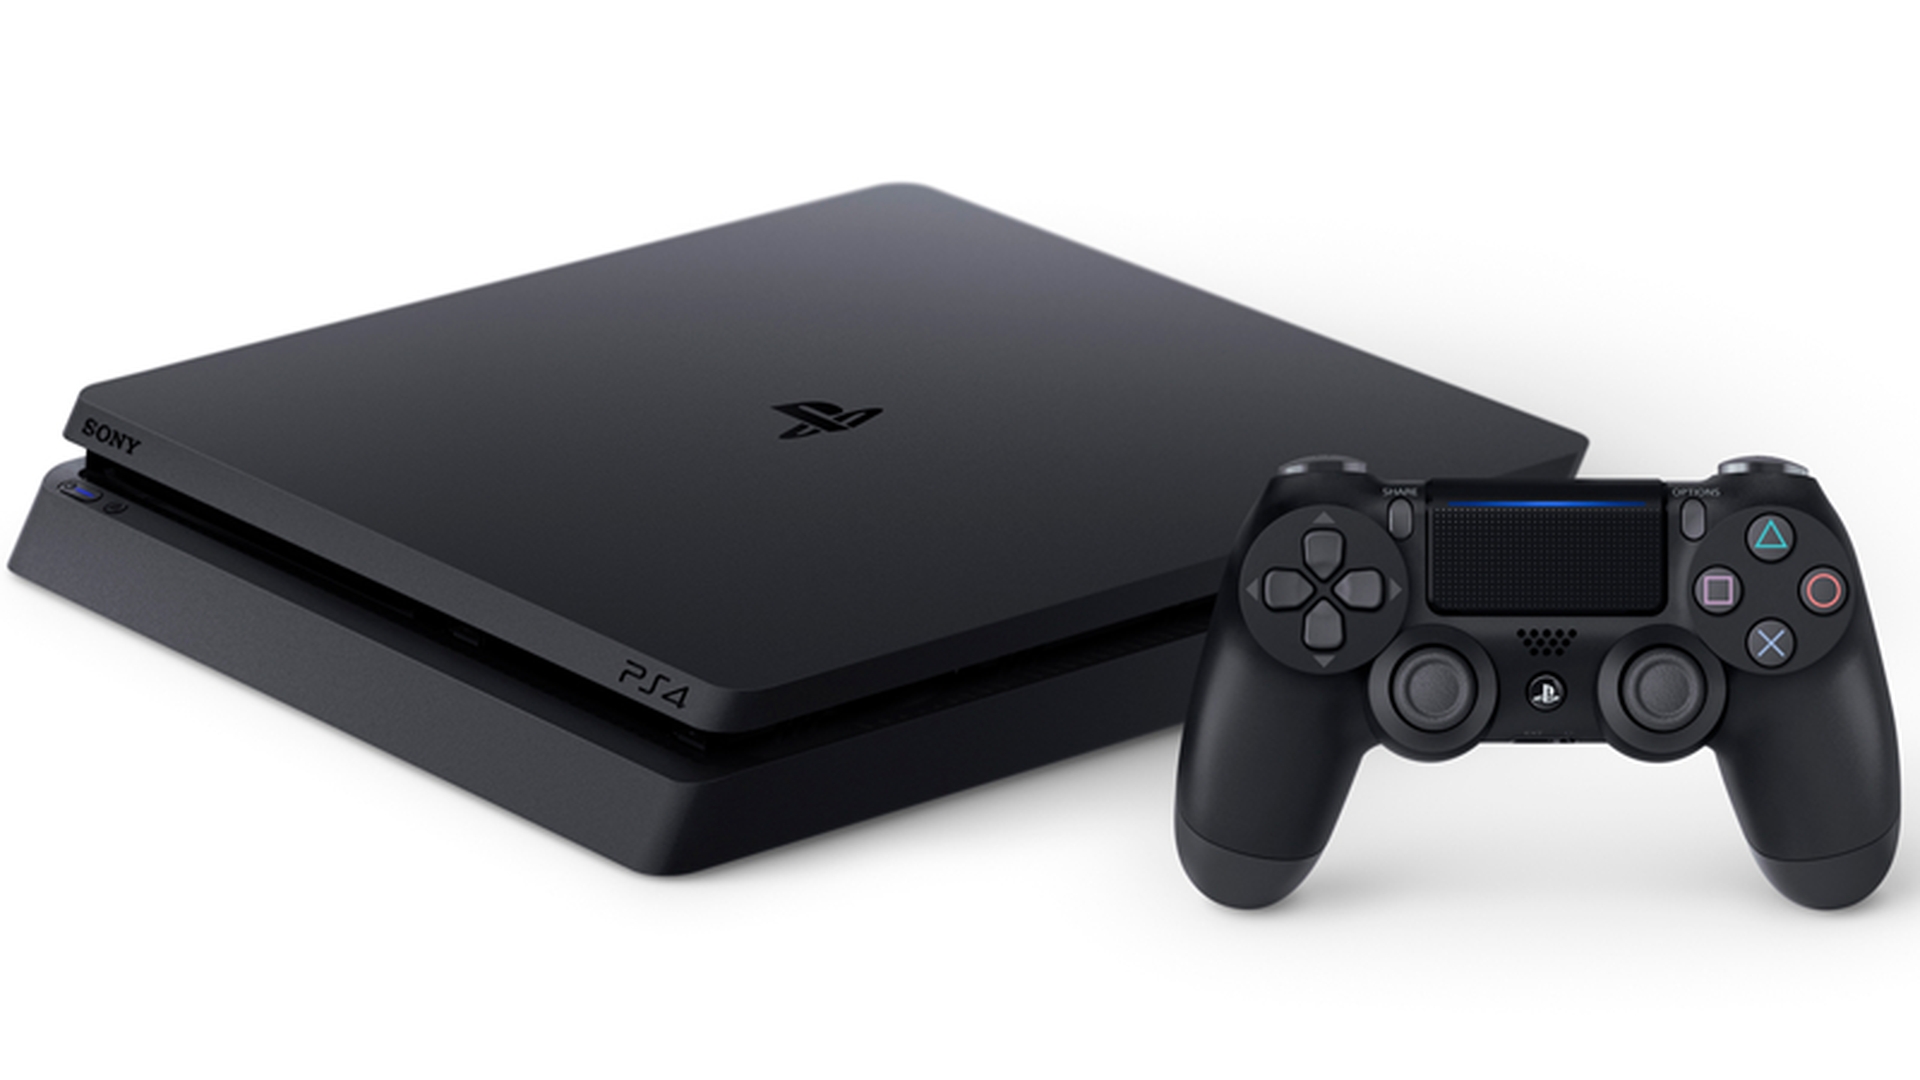 PlayStation4  ＋ソフト